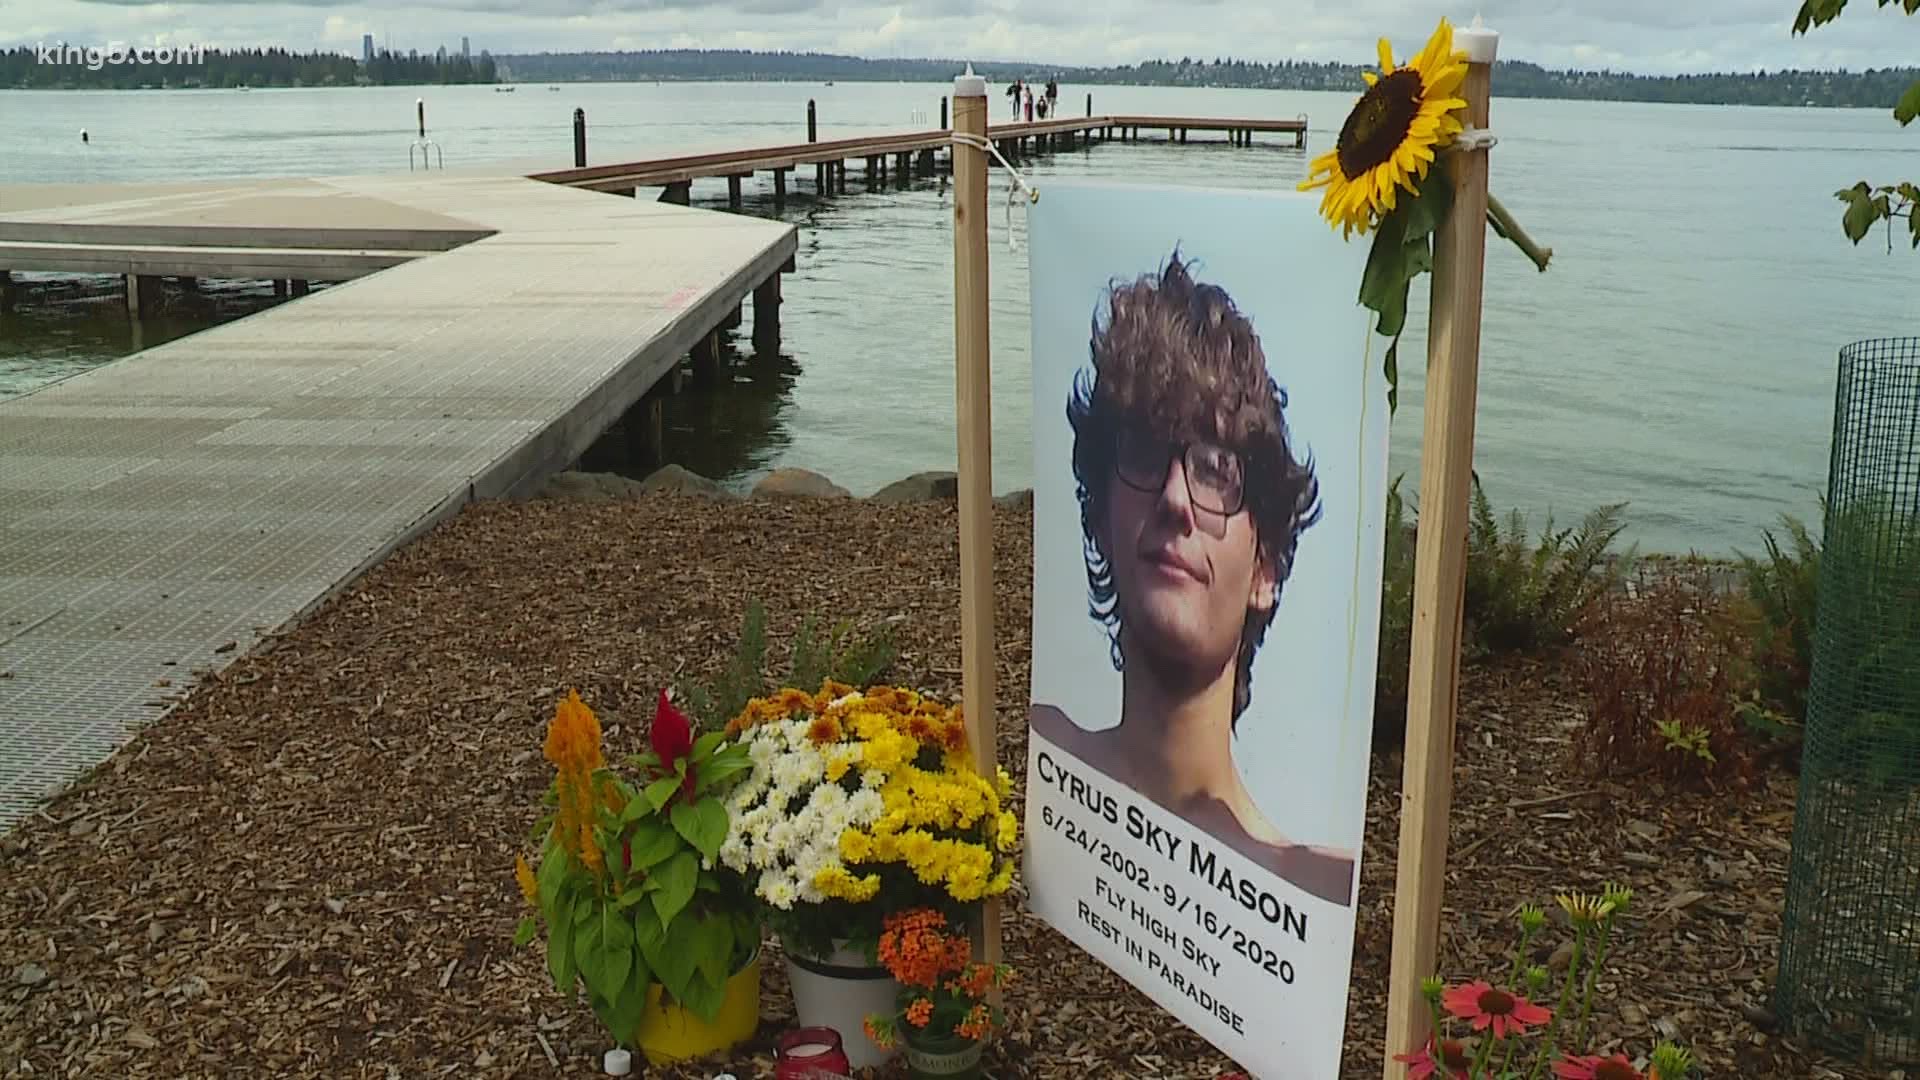 A teen was shot and killed at Houghton Beach Park in Kirkland. Police said the beach was a meeting point for a firearms exchange.